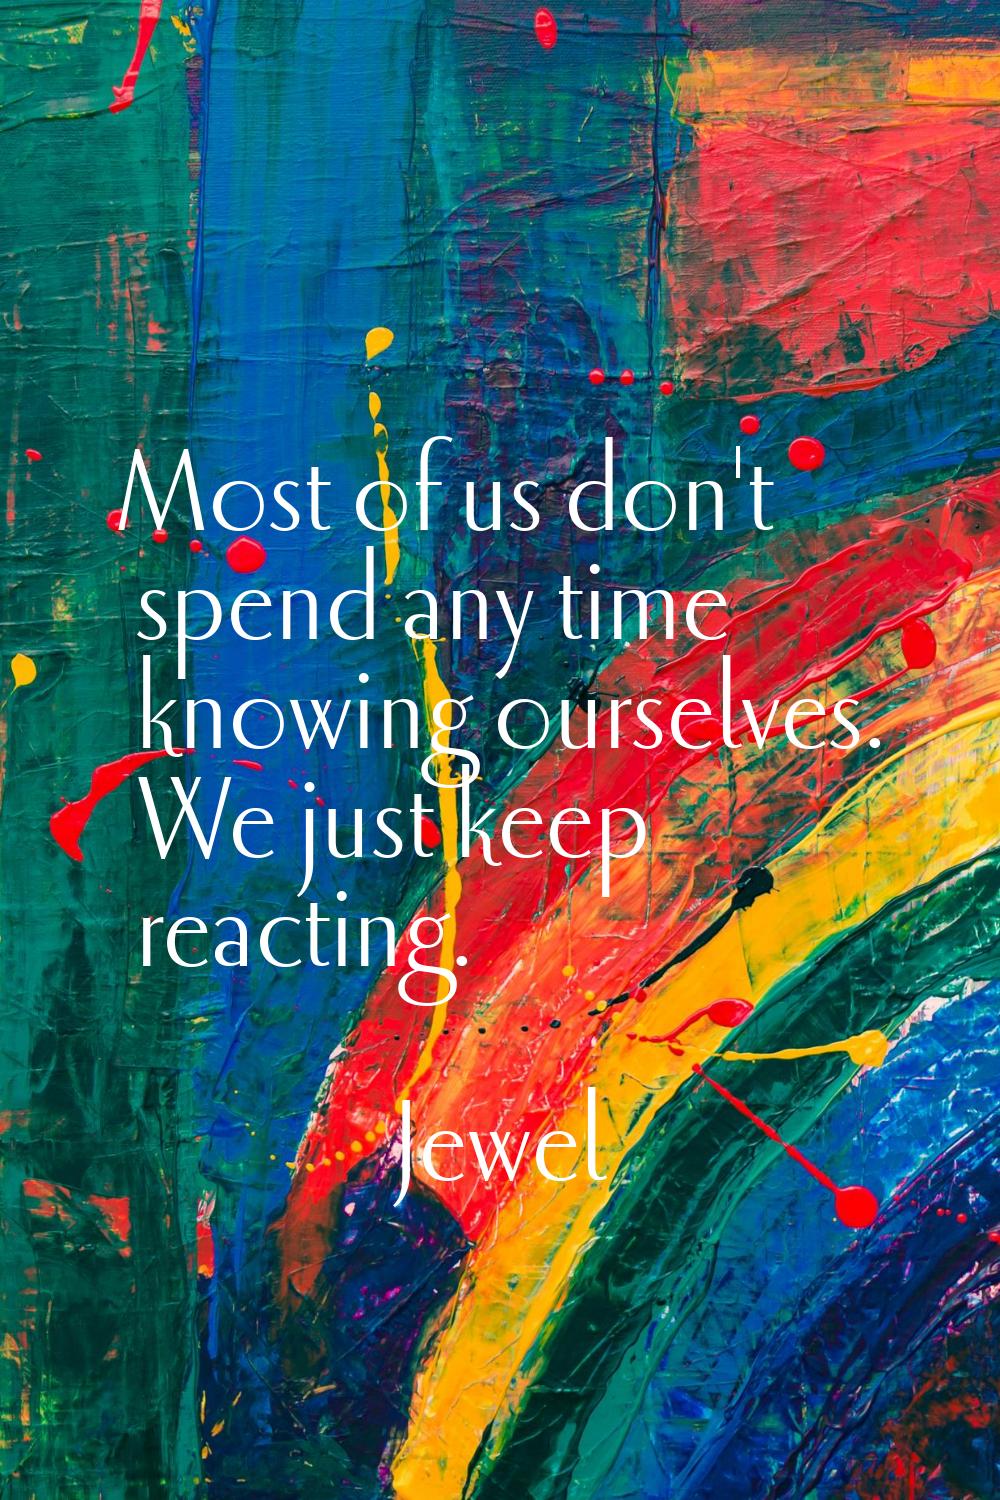 Most of us don't spend any time knowing ourselves. We just keep reacting.